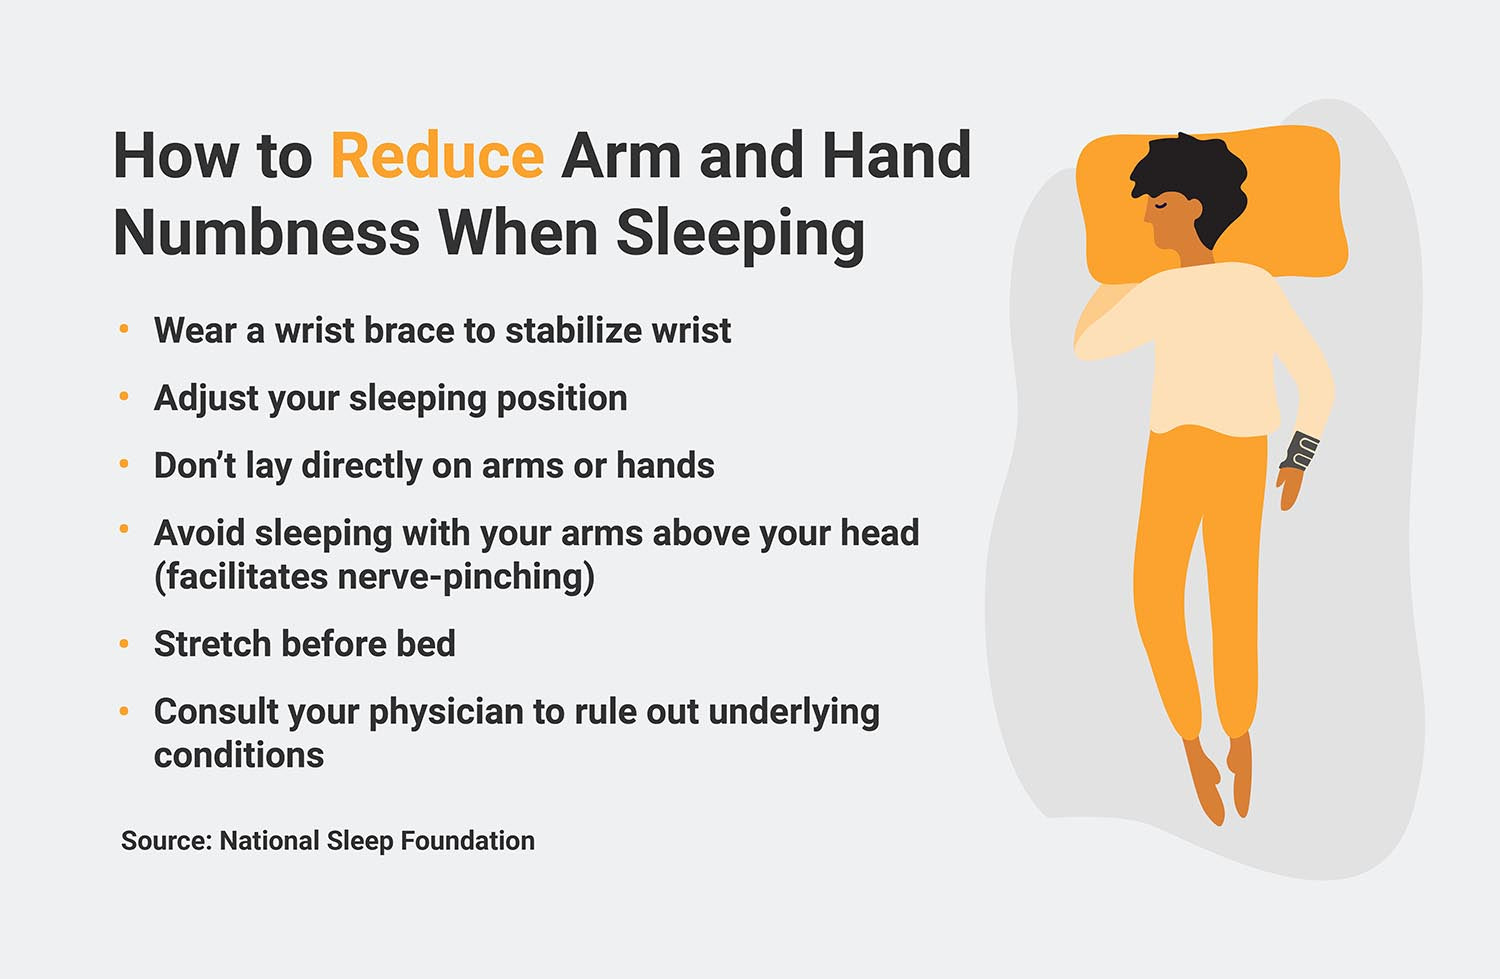 https://cdn.shopify.com/s/files/1/0344/5689/5623/files/How_to_Reduce_Arm_and_Hand_Numbness_When_Sleeping_Infographic.jpg?v=1637594626